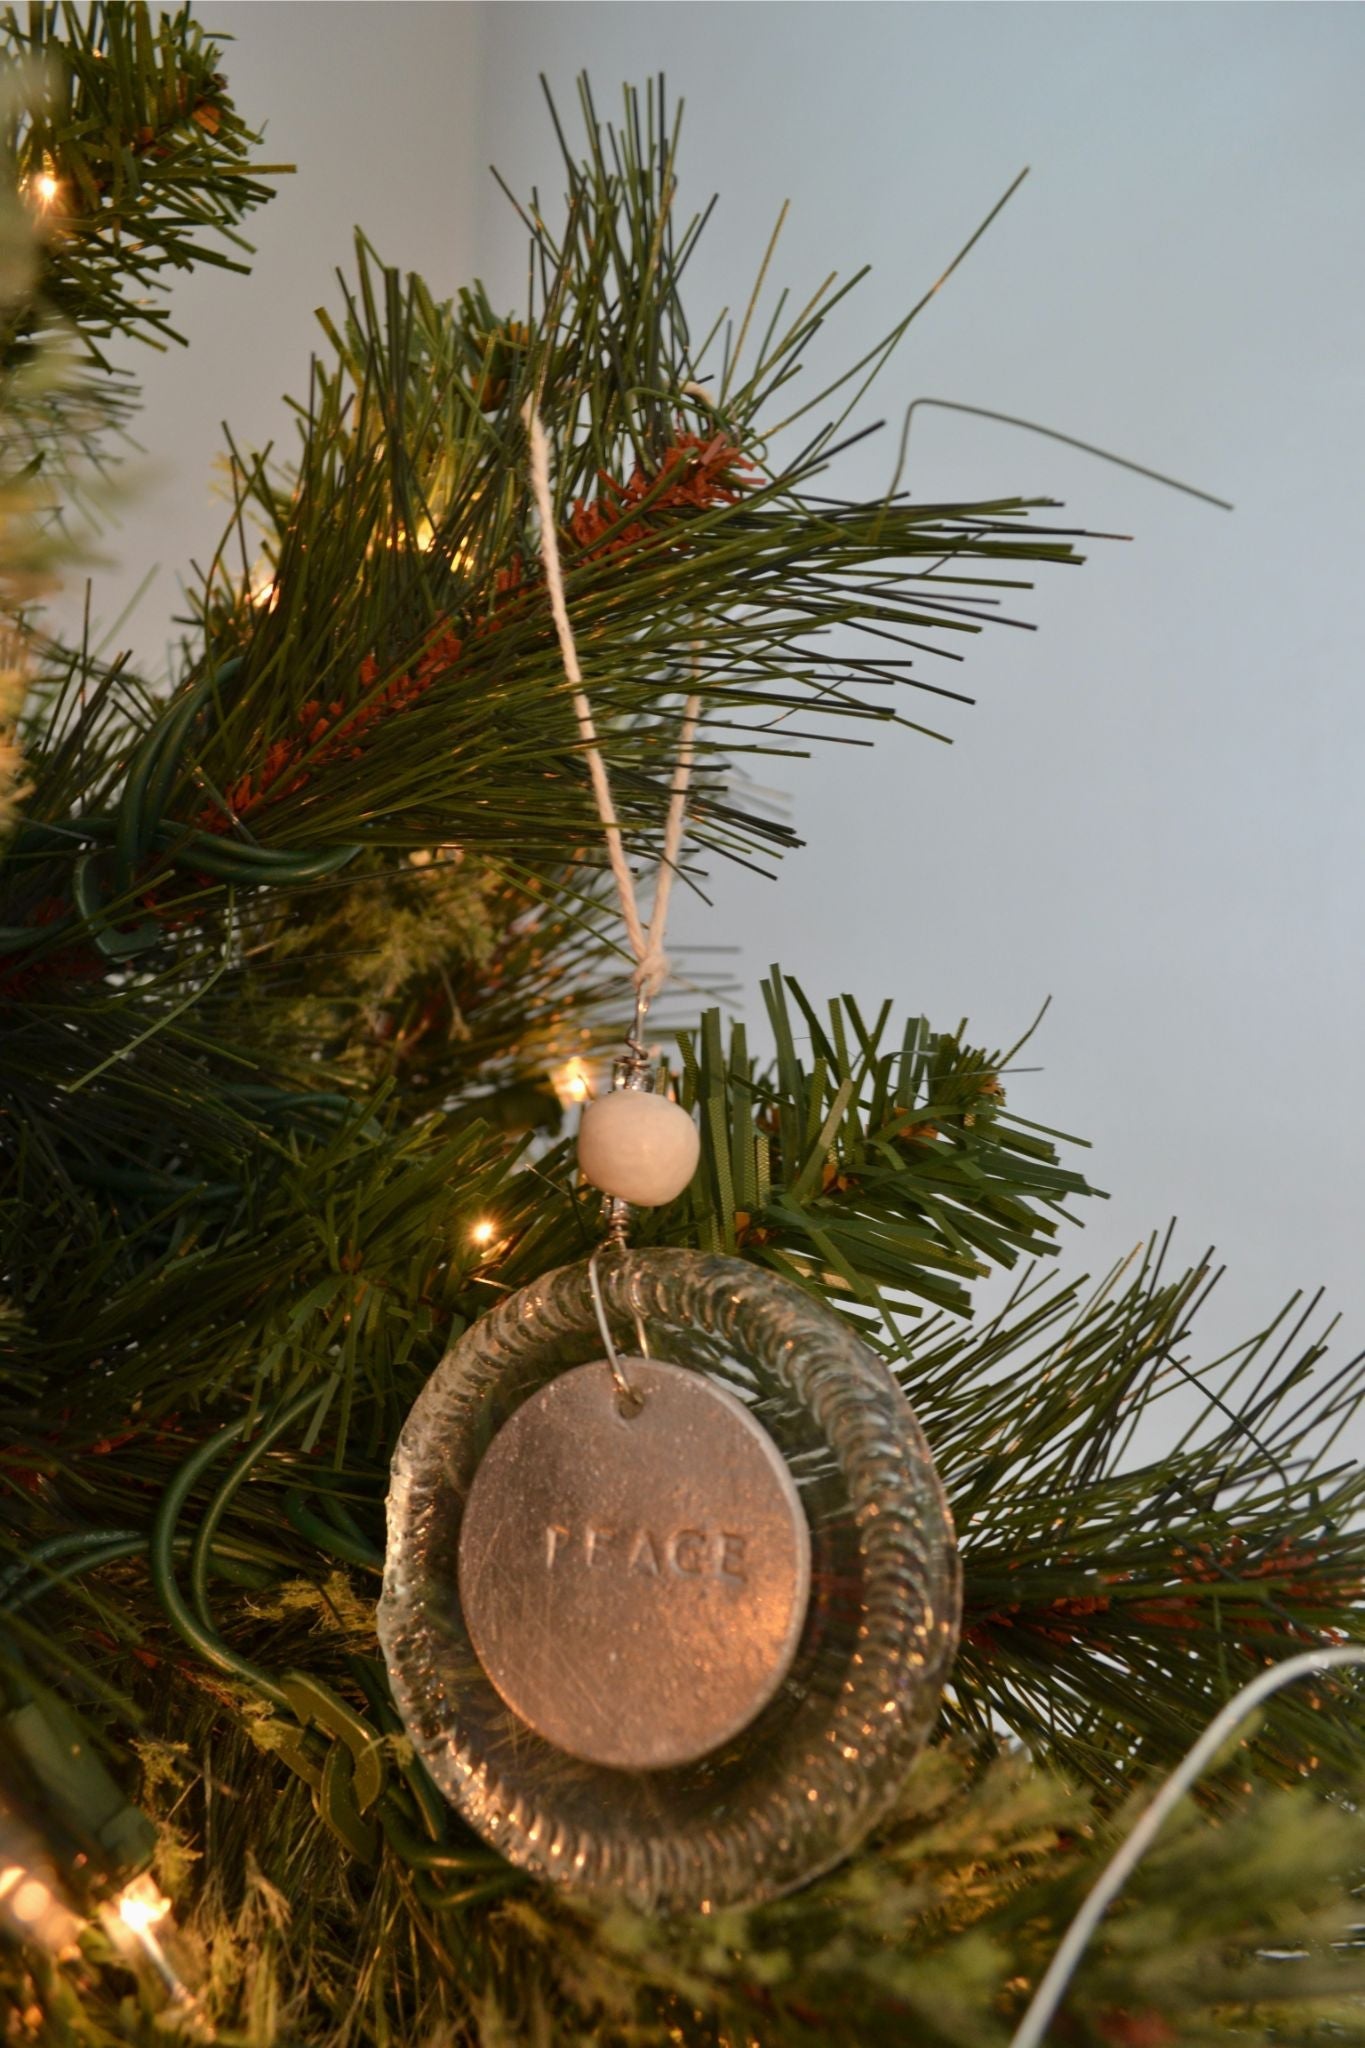 Upcycled Bottle Cap Ornament: A Celebration of Second Stories**